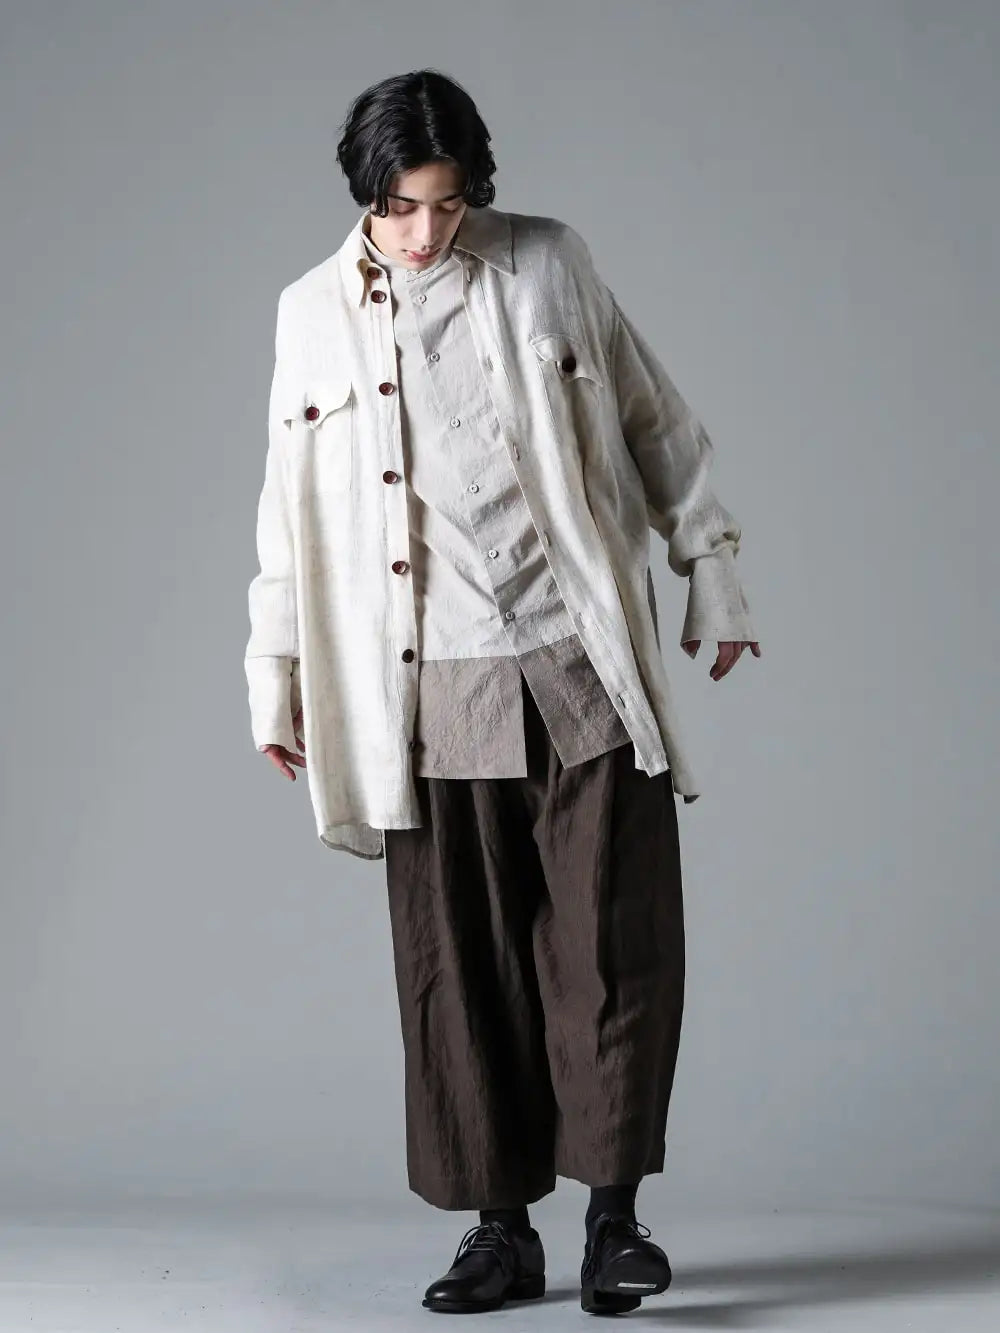 Peng Tai DEVOA ZIGGY CHEN GUIDI  24SS スタイリング - Choose items that go well with the three brands featuring distinct nuances - PTS24M06-2 Hand Dye Double Pocket Oversized Shirt SHE-CTKM Shirt Cotton 0M2410509 Plaited Extra Wide Leg Trousers Classic Derby Shoes Lace Up Single Sole - Horse Full Grain - 992X Black 1-001